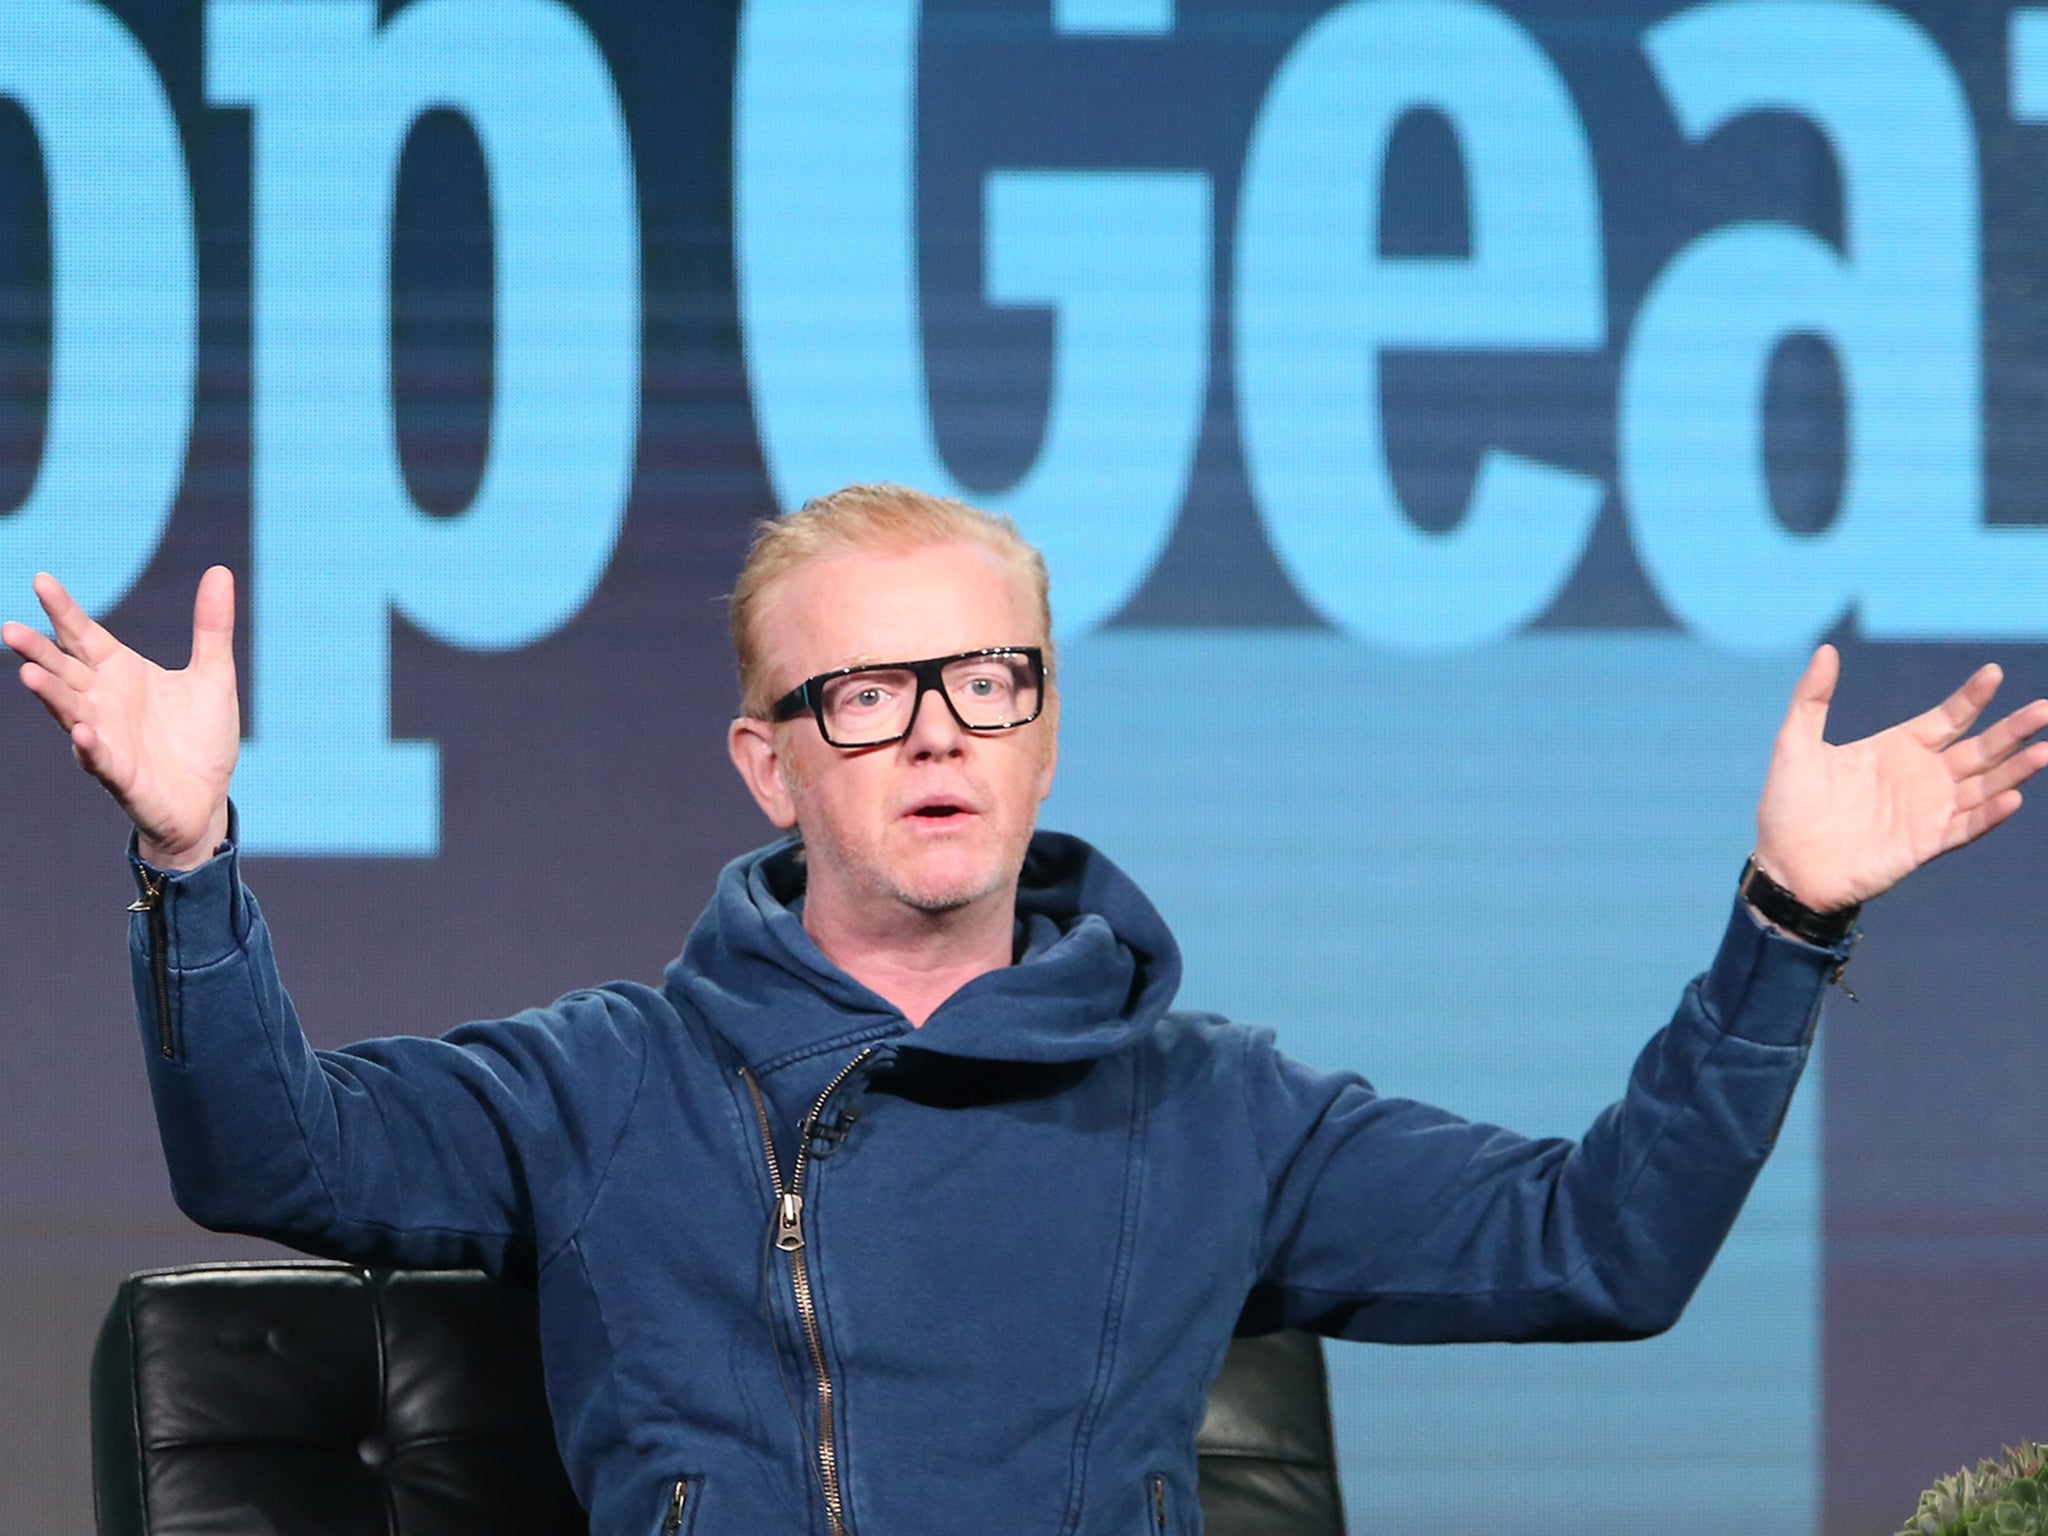 Chris Evans replaced Jeremy Clarkson as lead presenter of the BBC's successful Top Gear.